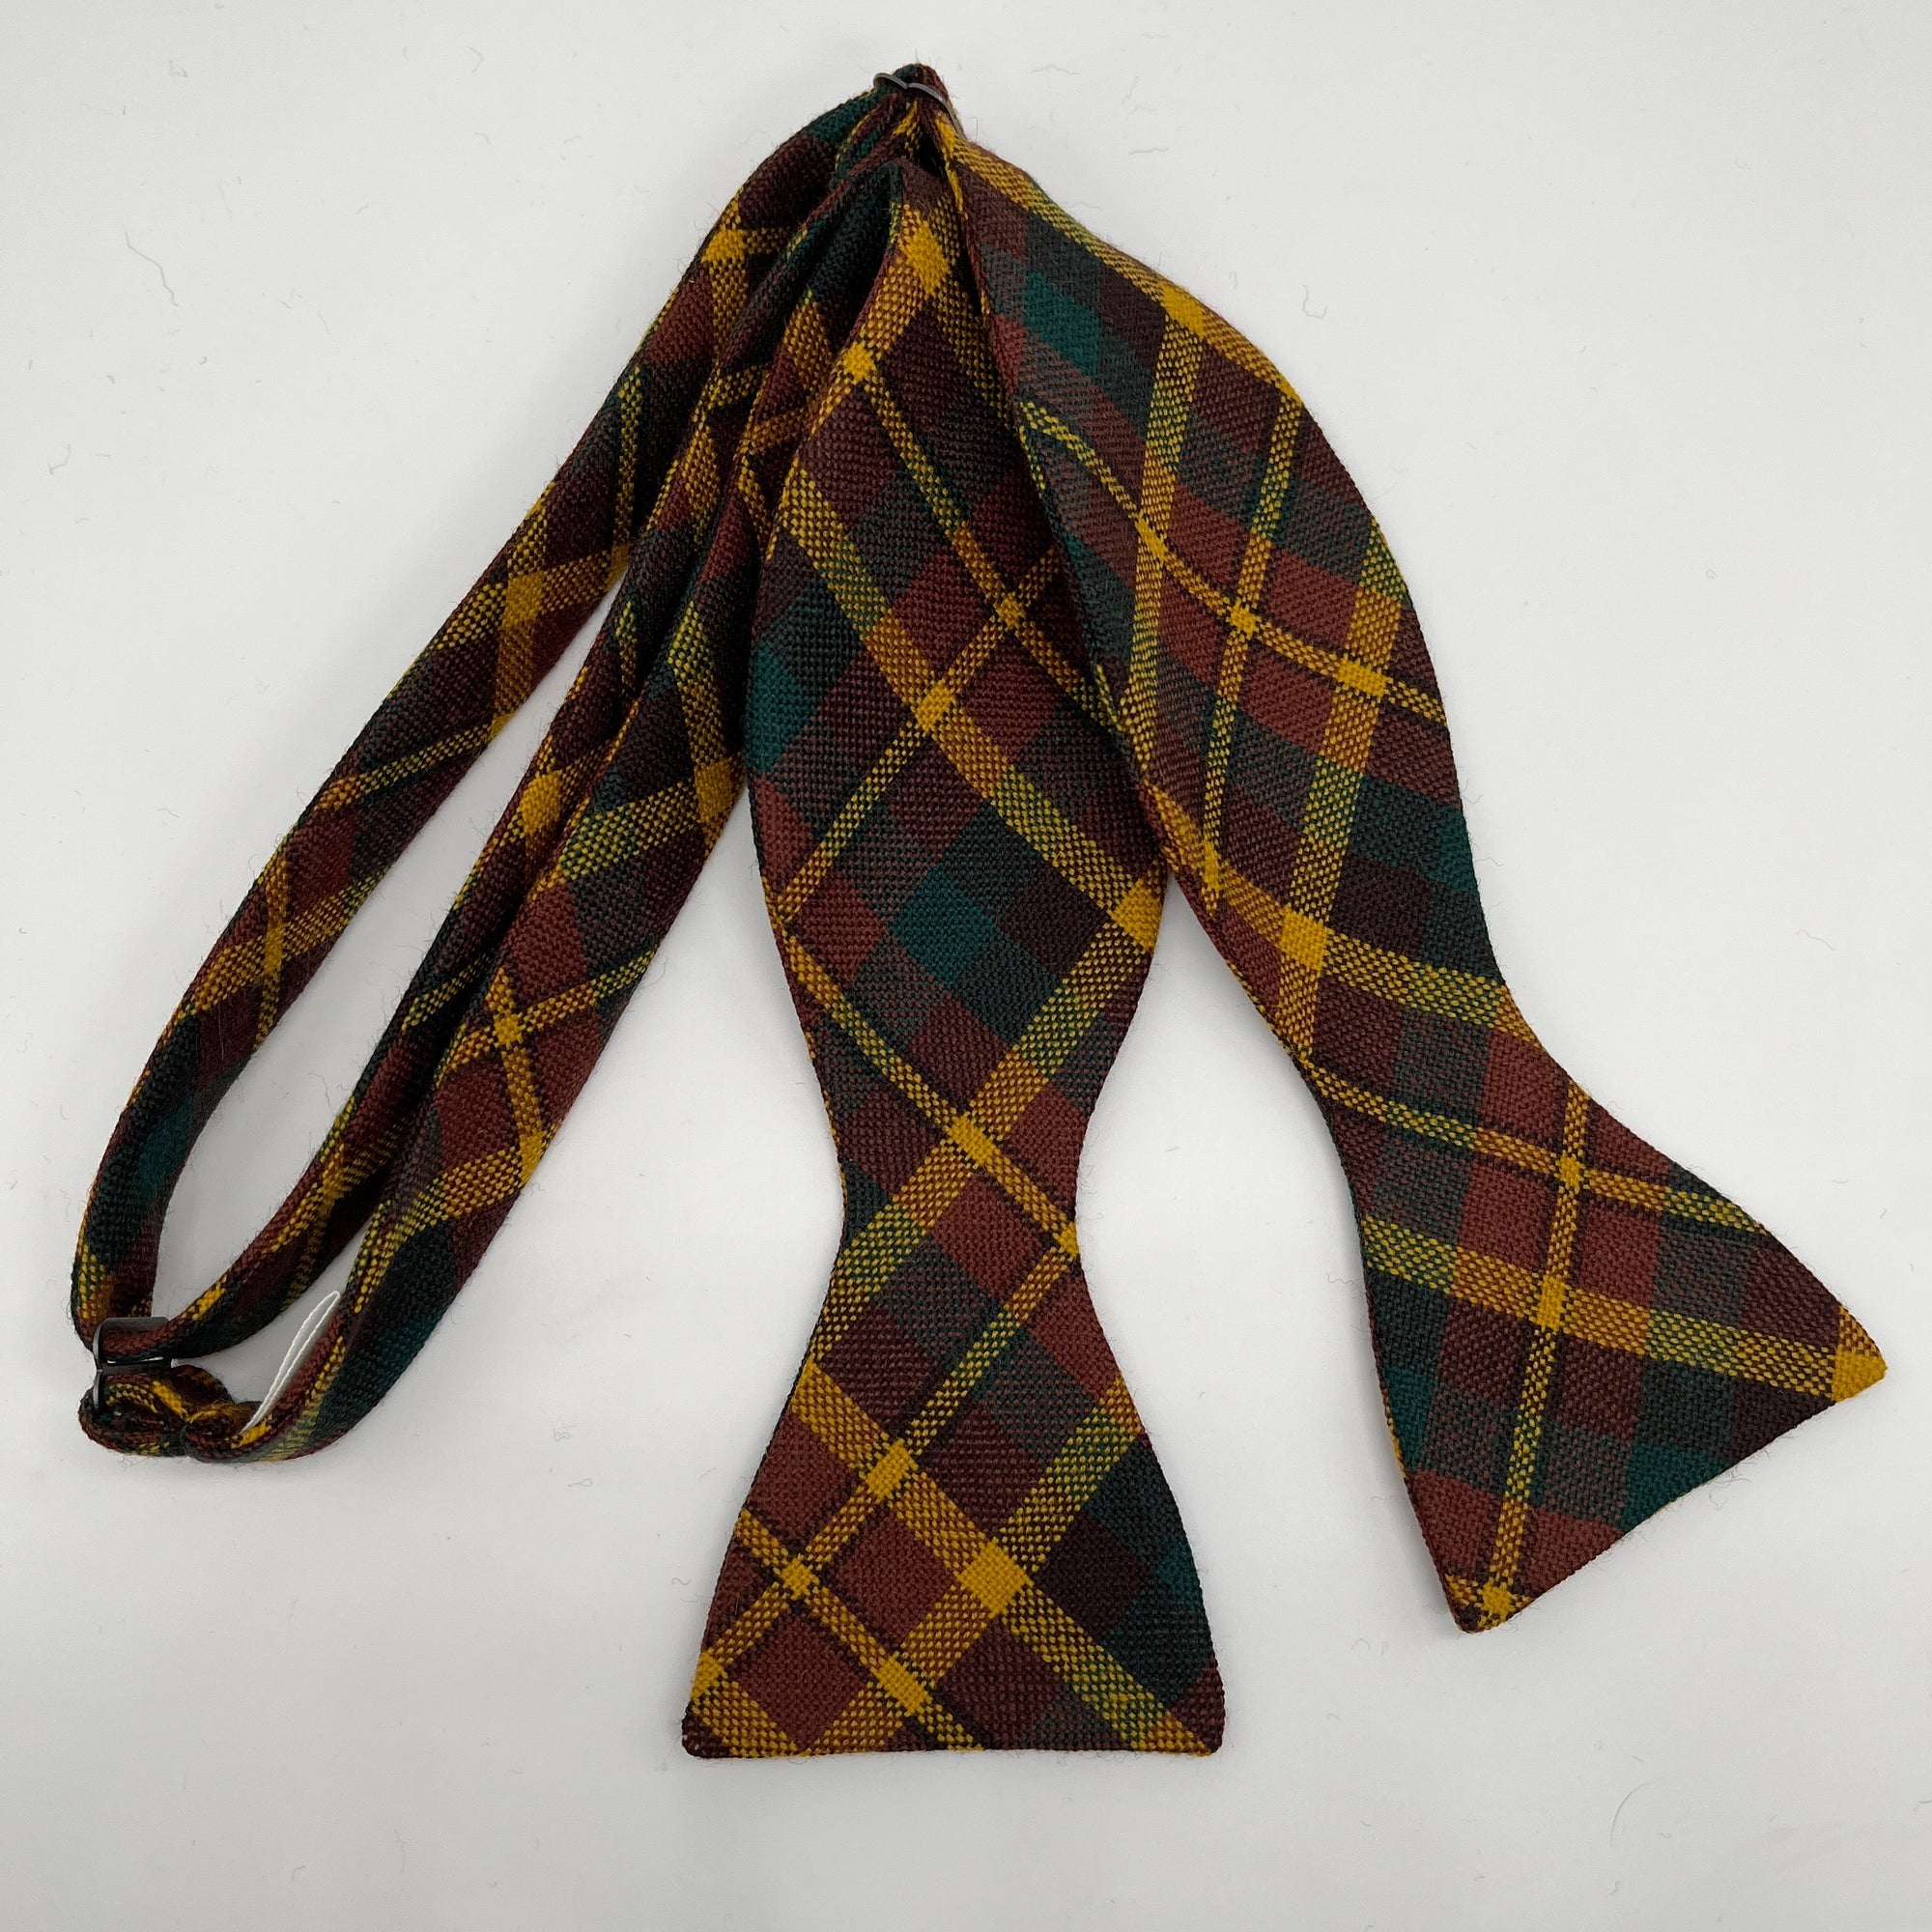 County Monaghan Tartan Bow Tie by the Belfast Bow Company